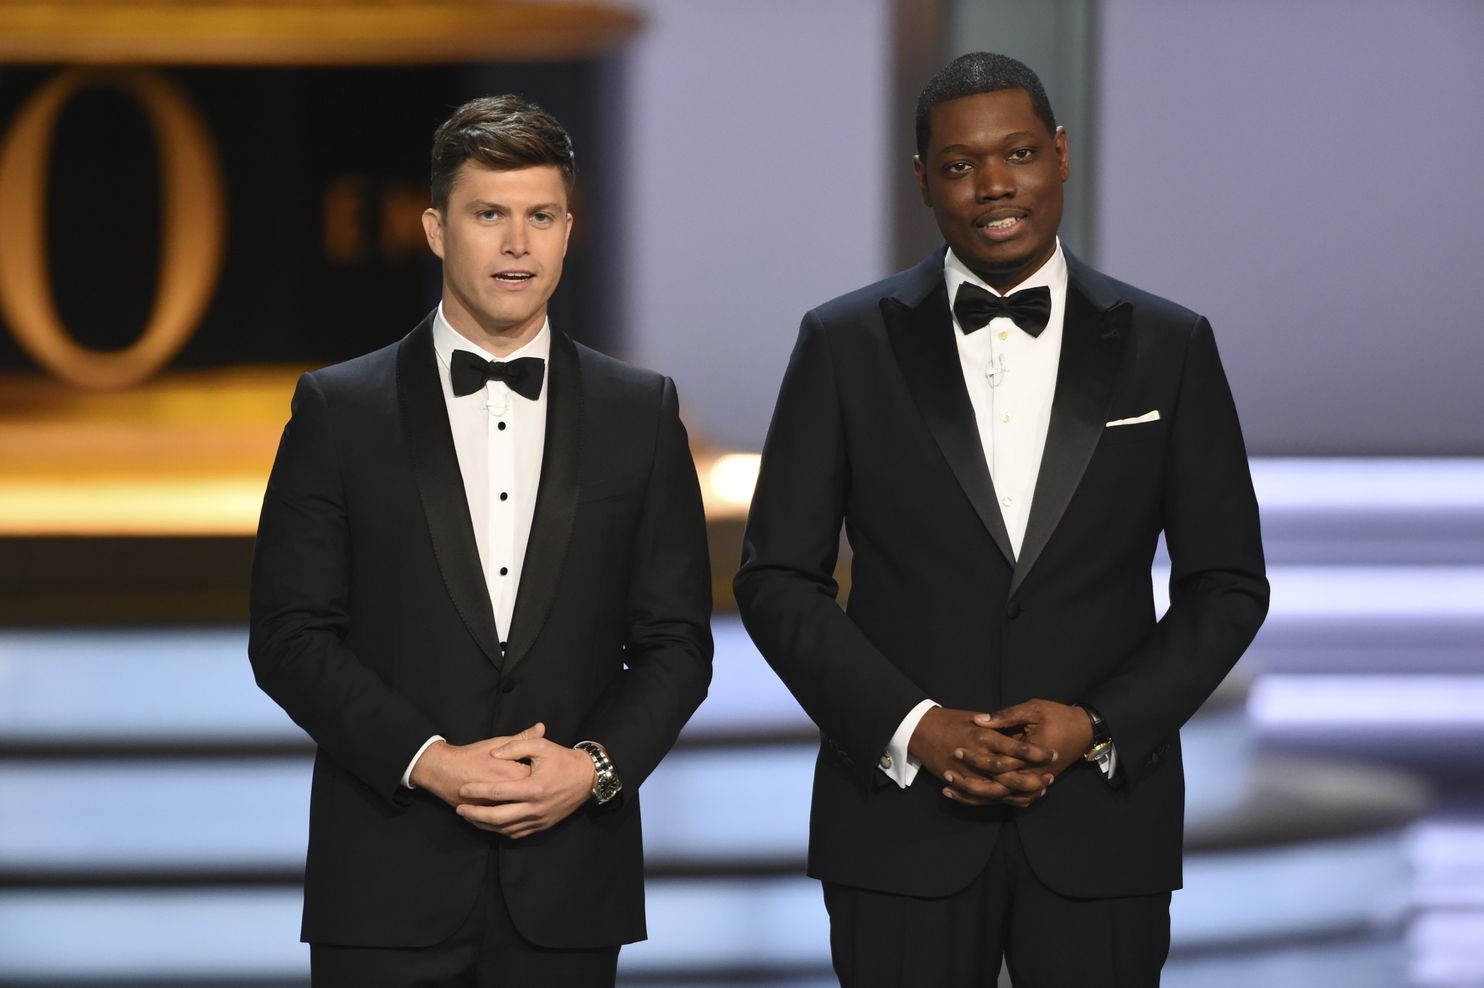 More of the same: Despite self-referential jokes, the Emmys lacked diversity